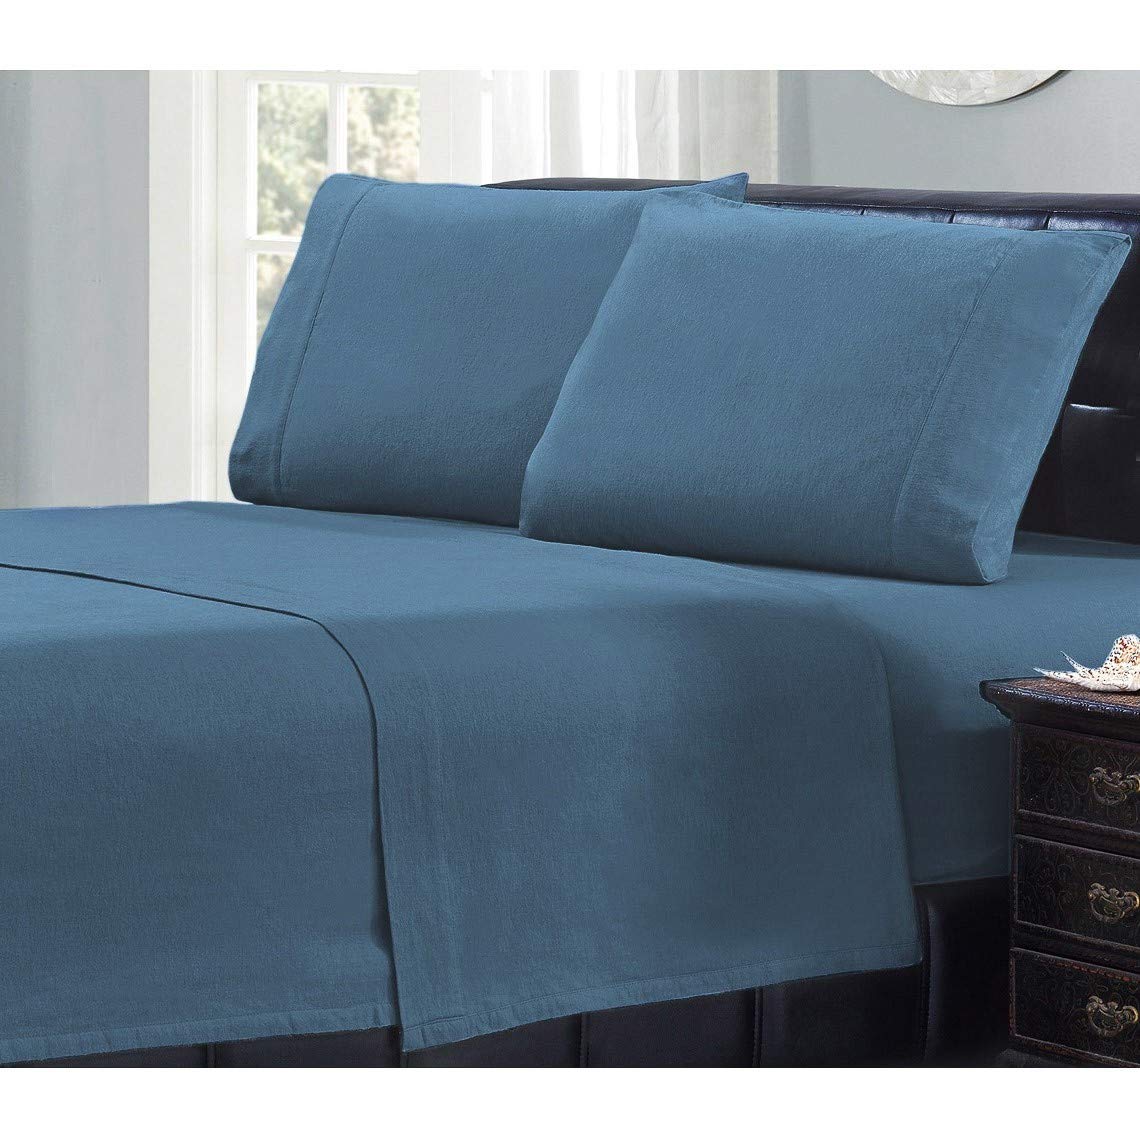 Book Cover Mellanni Flannel 100% Cotton Twin Sheets Set - Fade, Stain, Shed and Wrinkle Resistant - Blue Twin Sheets - Include 1 Flat Sheet 66x96 - 1 Fitted Sheet 39x75 - 2 Pillow Cases 20x30 (Twin, Blue) Twin Blue